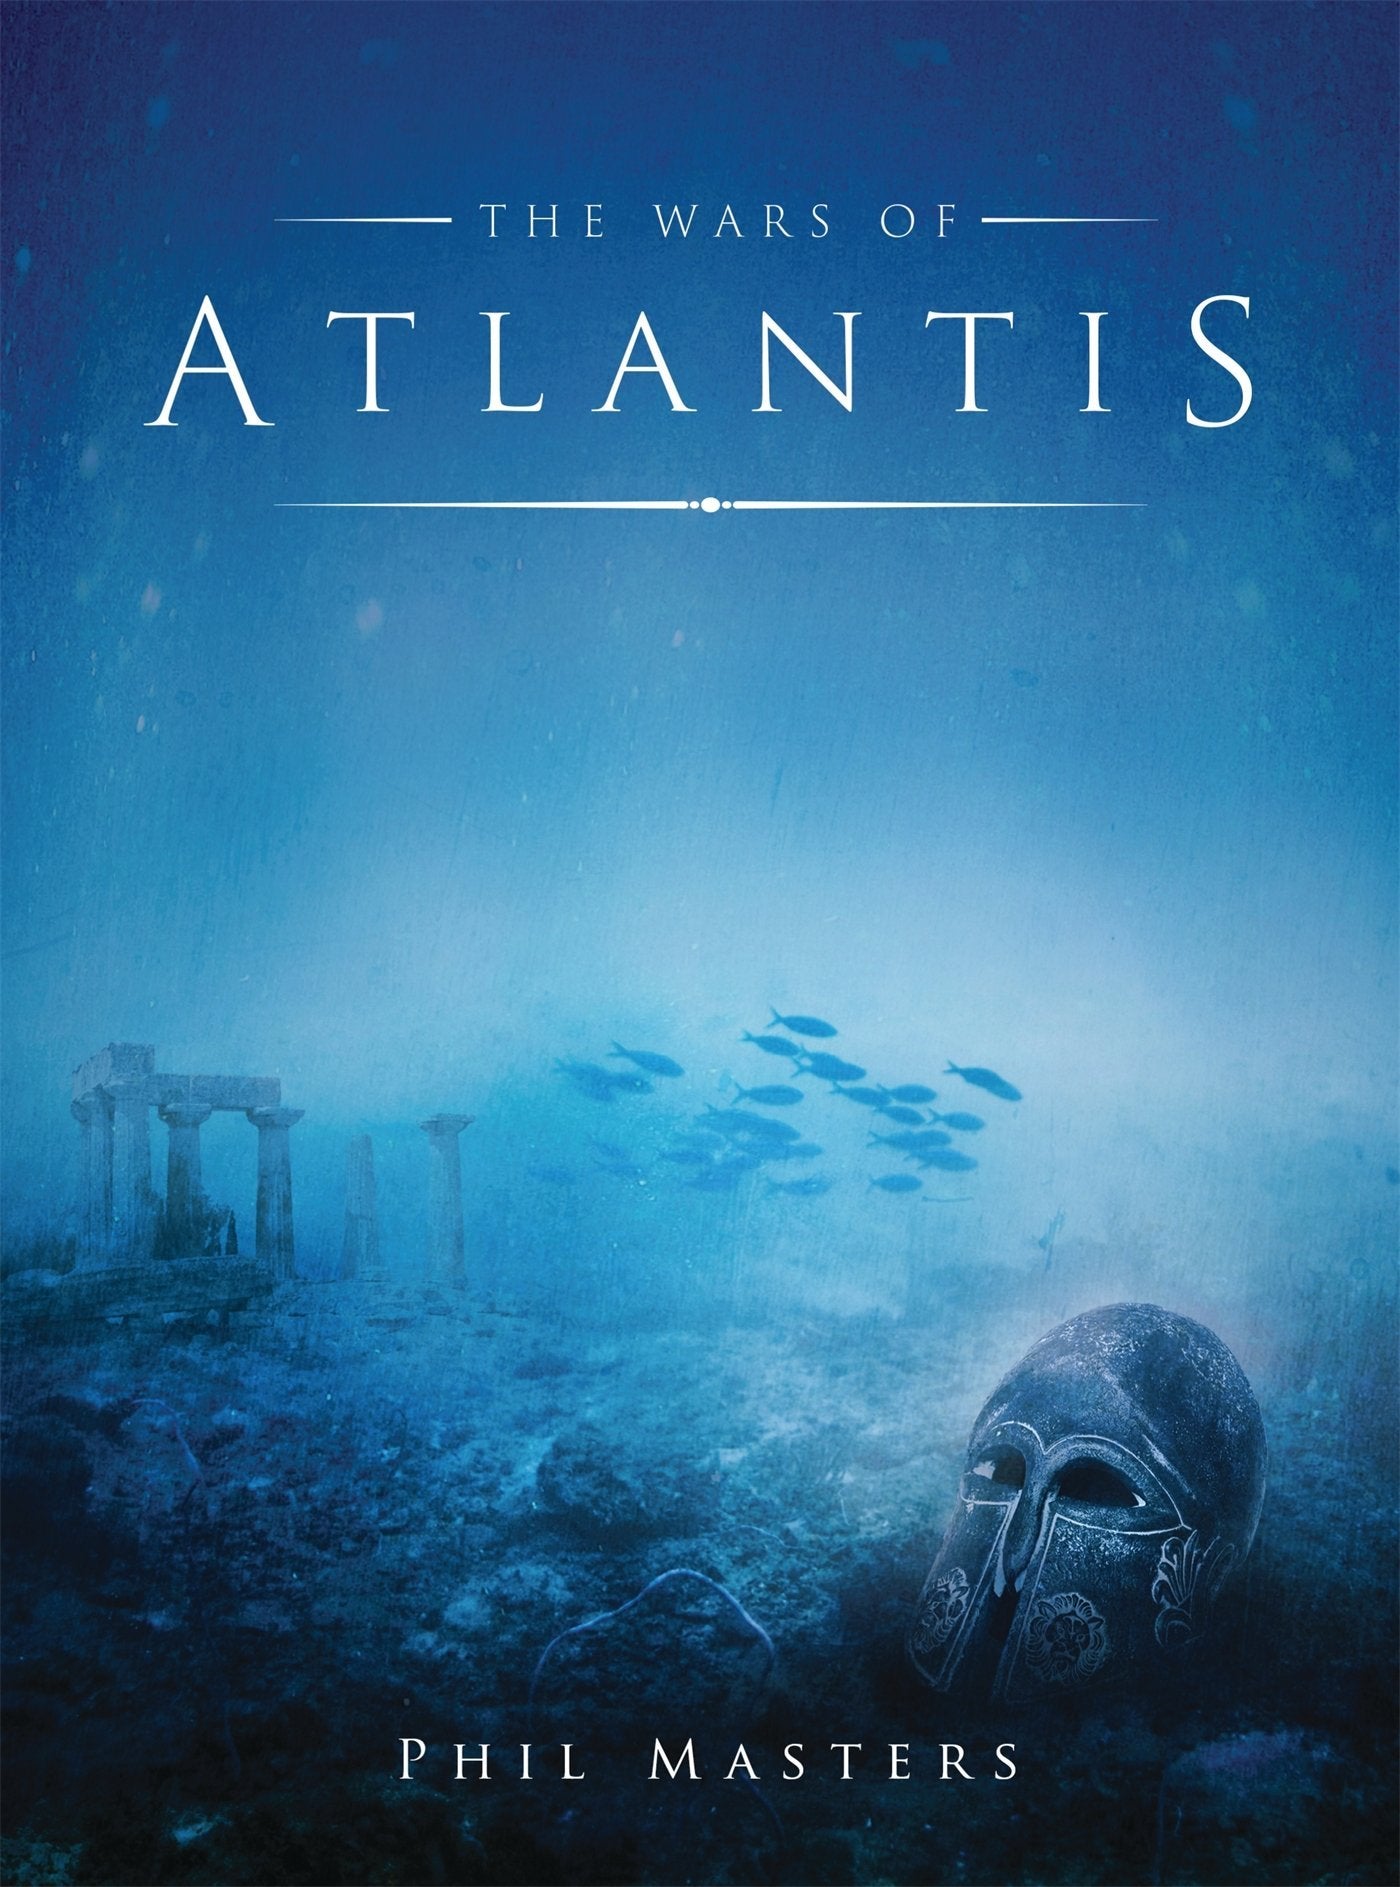 The Wars of Atlantis | All About Games